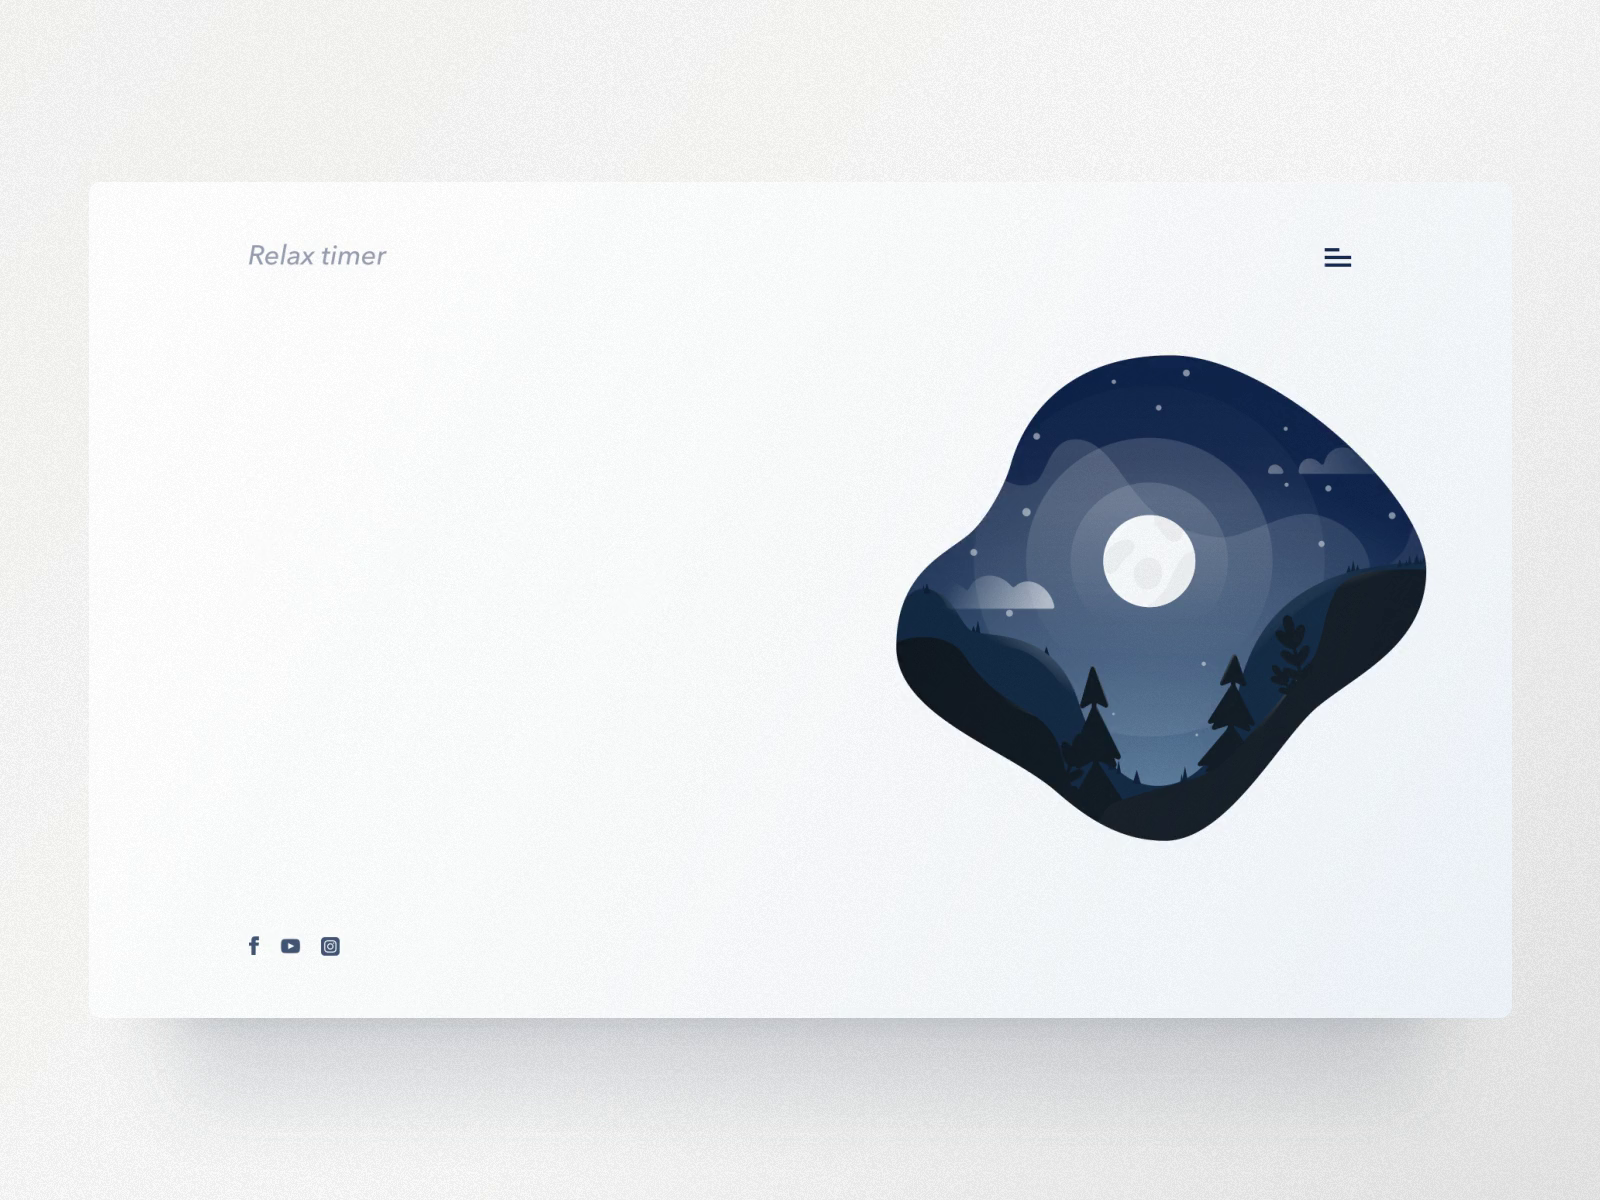 Relax timer by BEIO - Dmitry on Dribbble